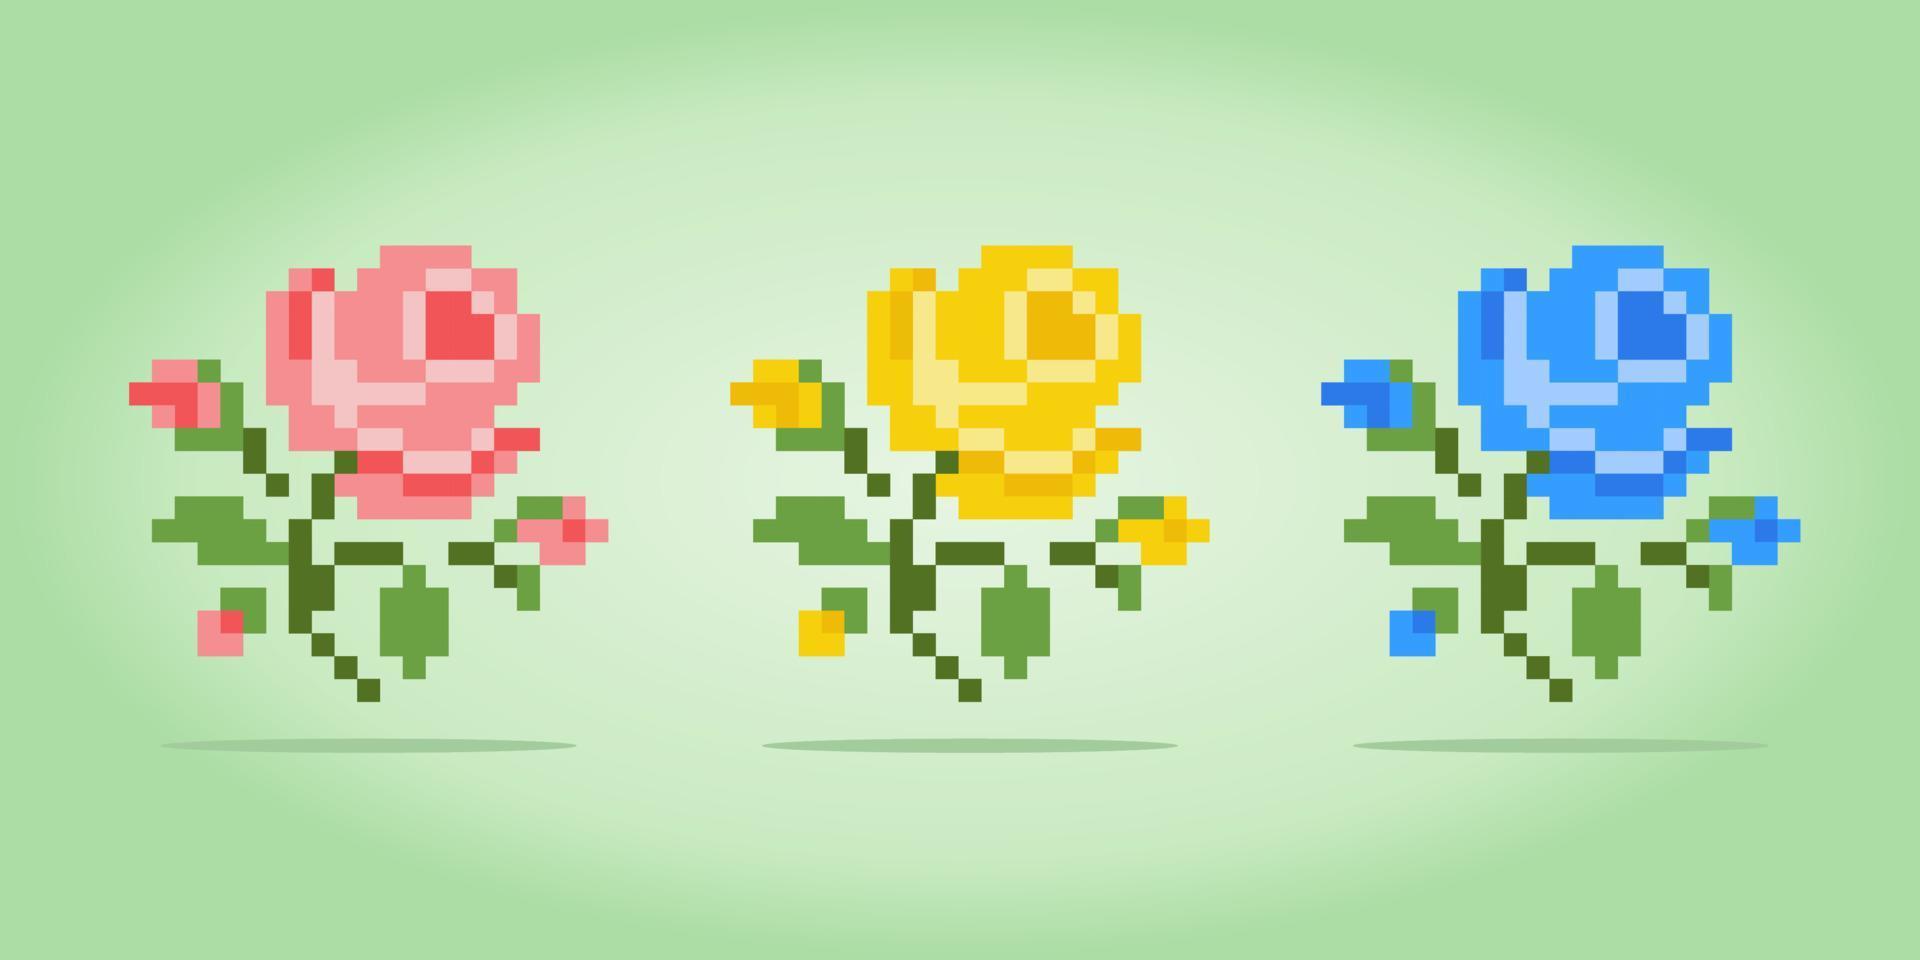 8 bit pixels of roses. flowers for Cross Stitch patterns, in vector illustrations.